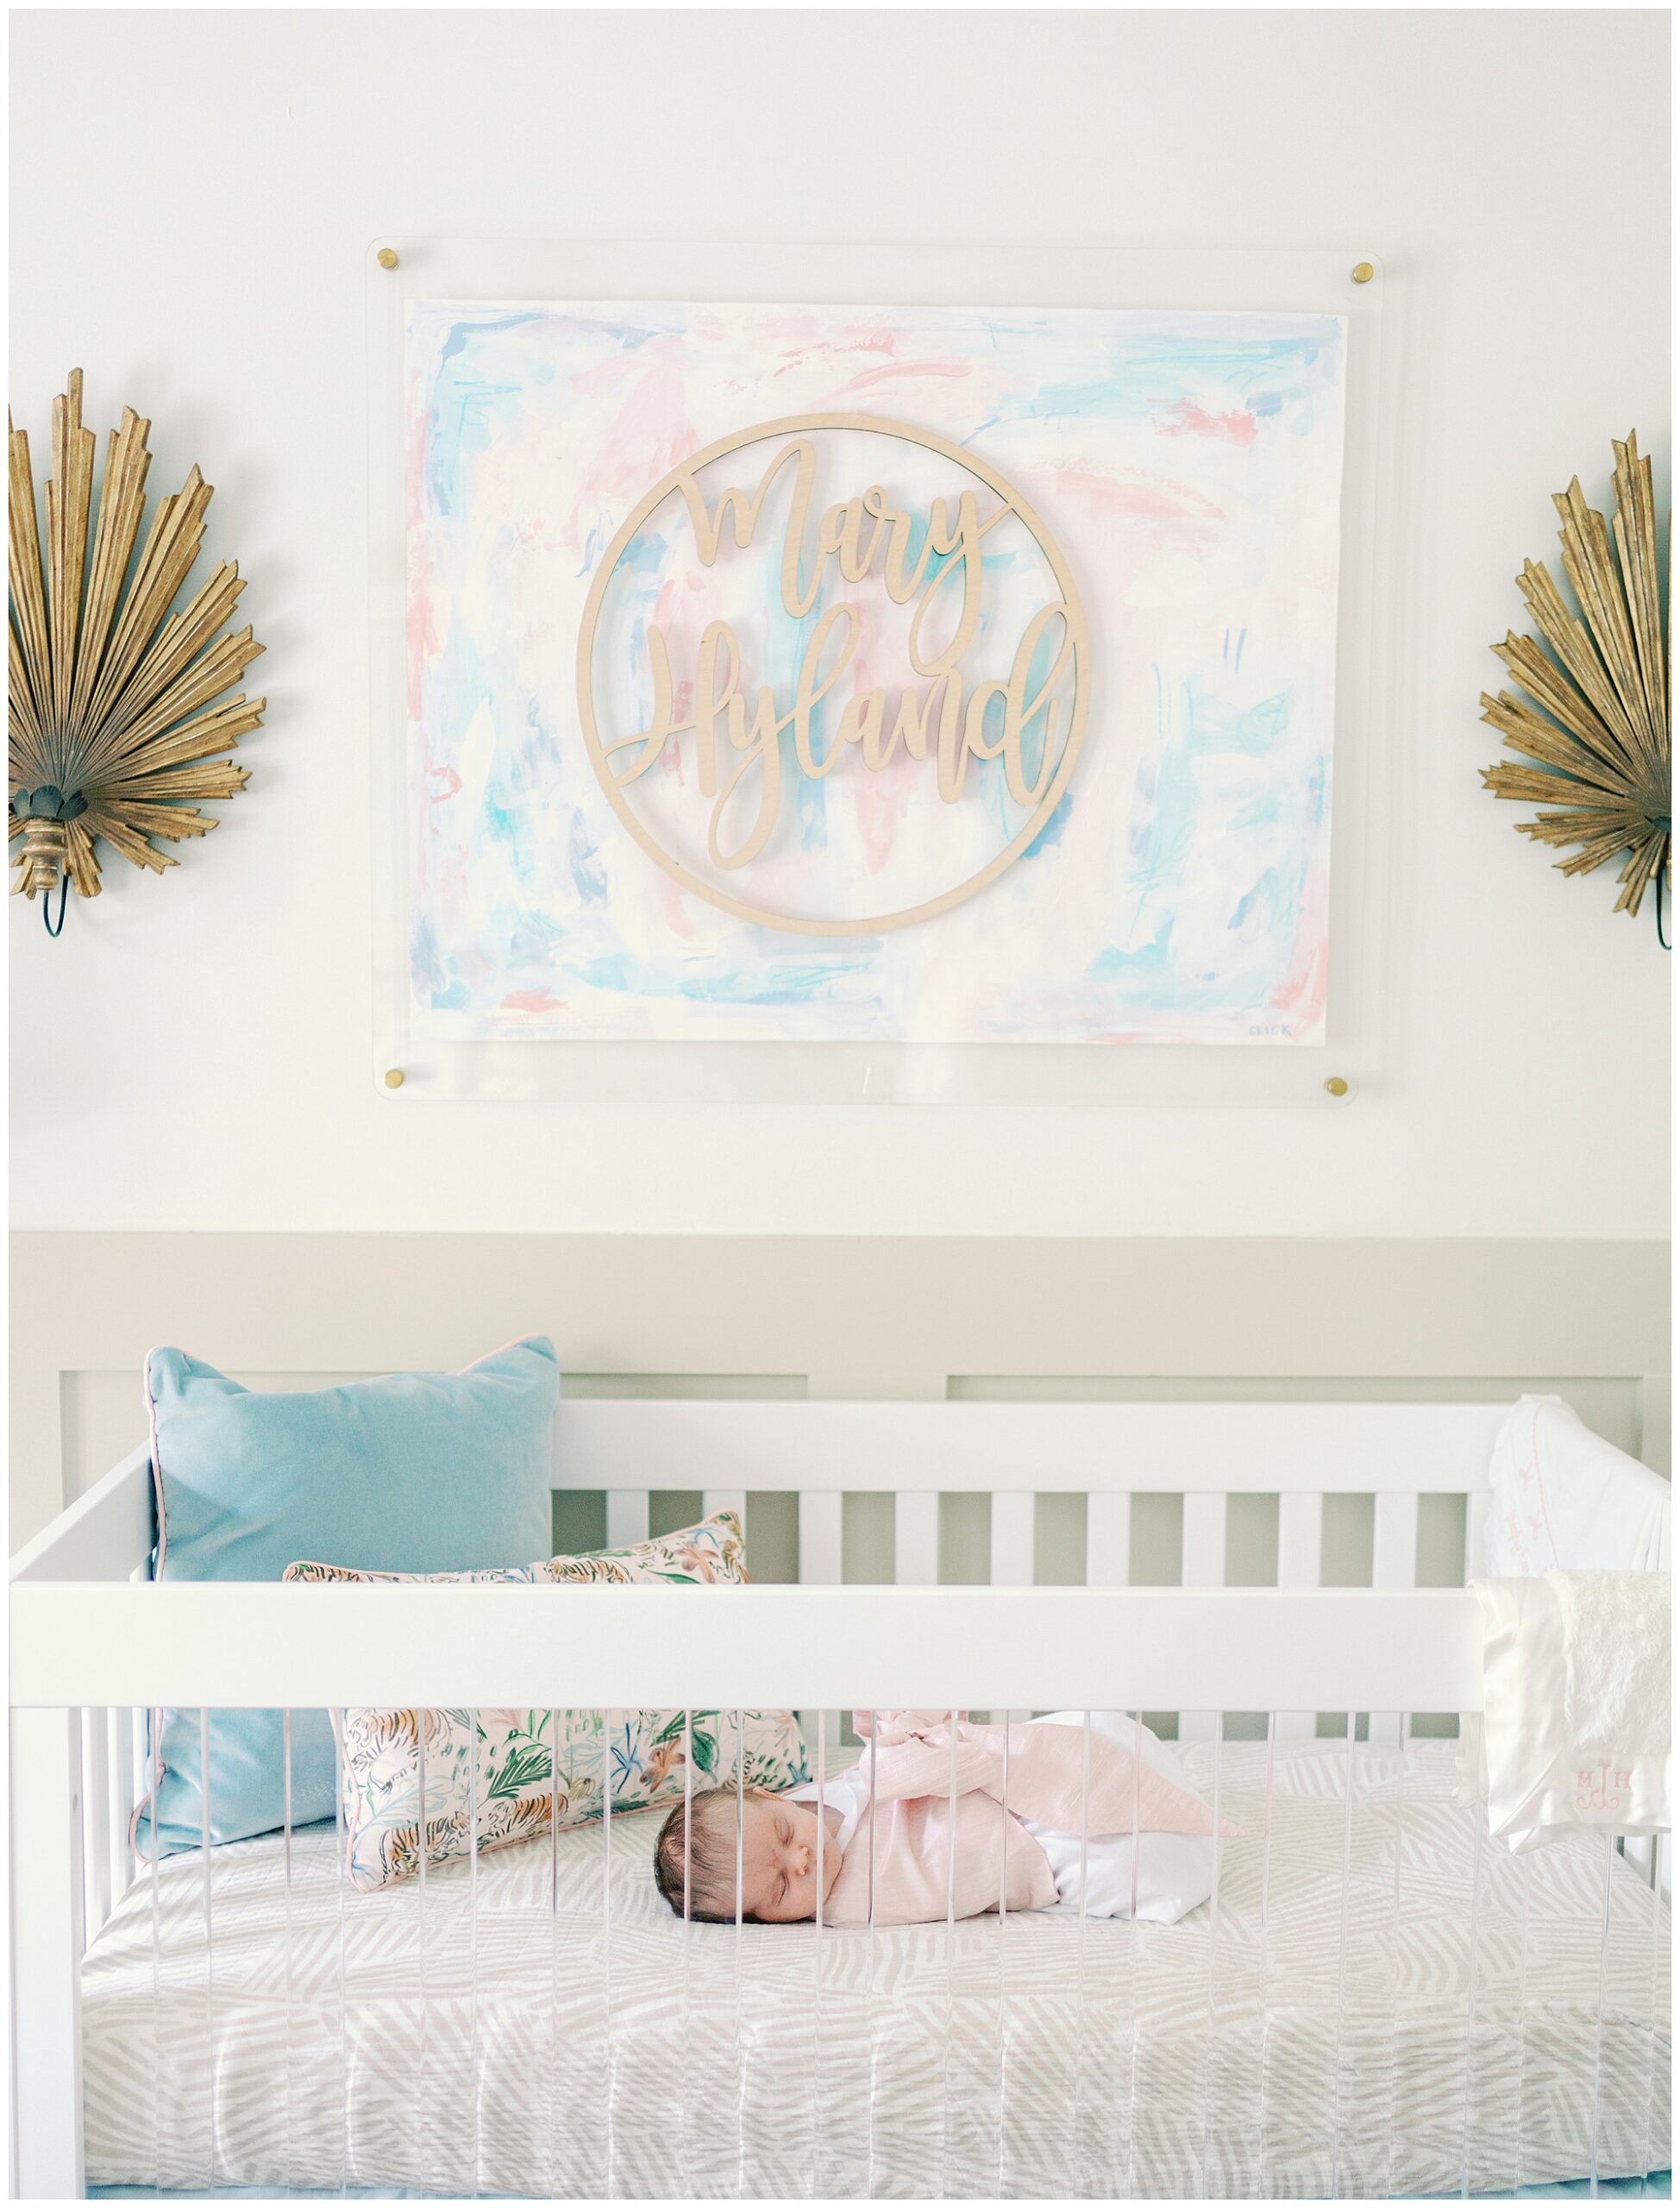 Image of classic girl nursery decor with a newborn baby laying in a white crib with acrylic front and a watercolor name painting hanging on the wall flanked by two gold palm frond wall art pieces.